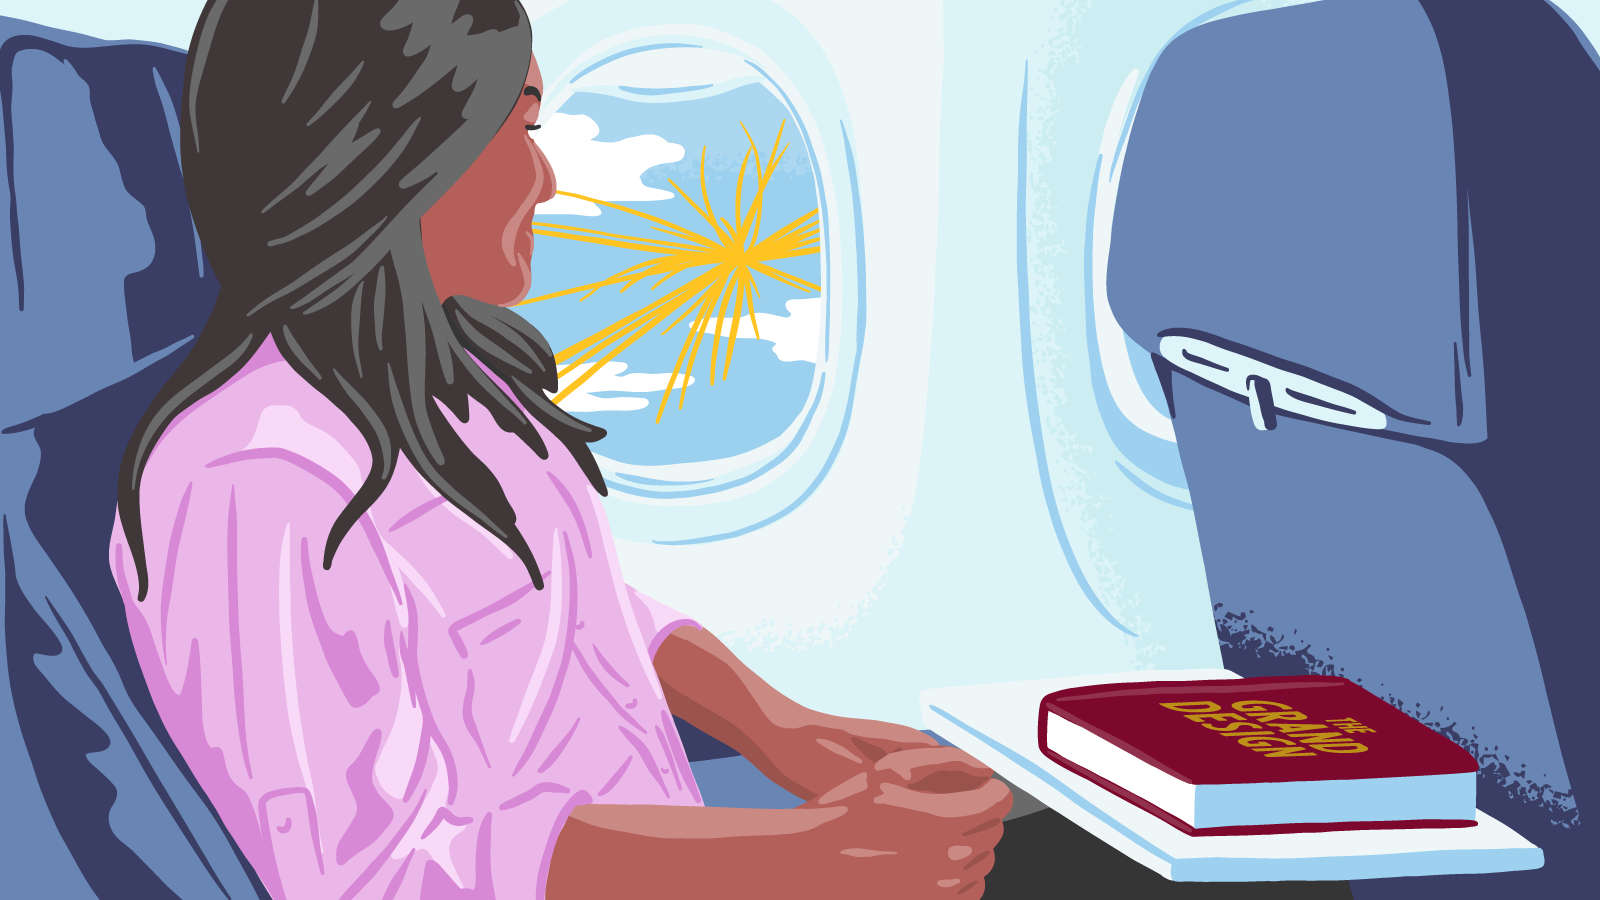 Illustration of a woman looking out the window of an airplane seeing a visual from the ATLAS experiment